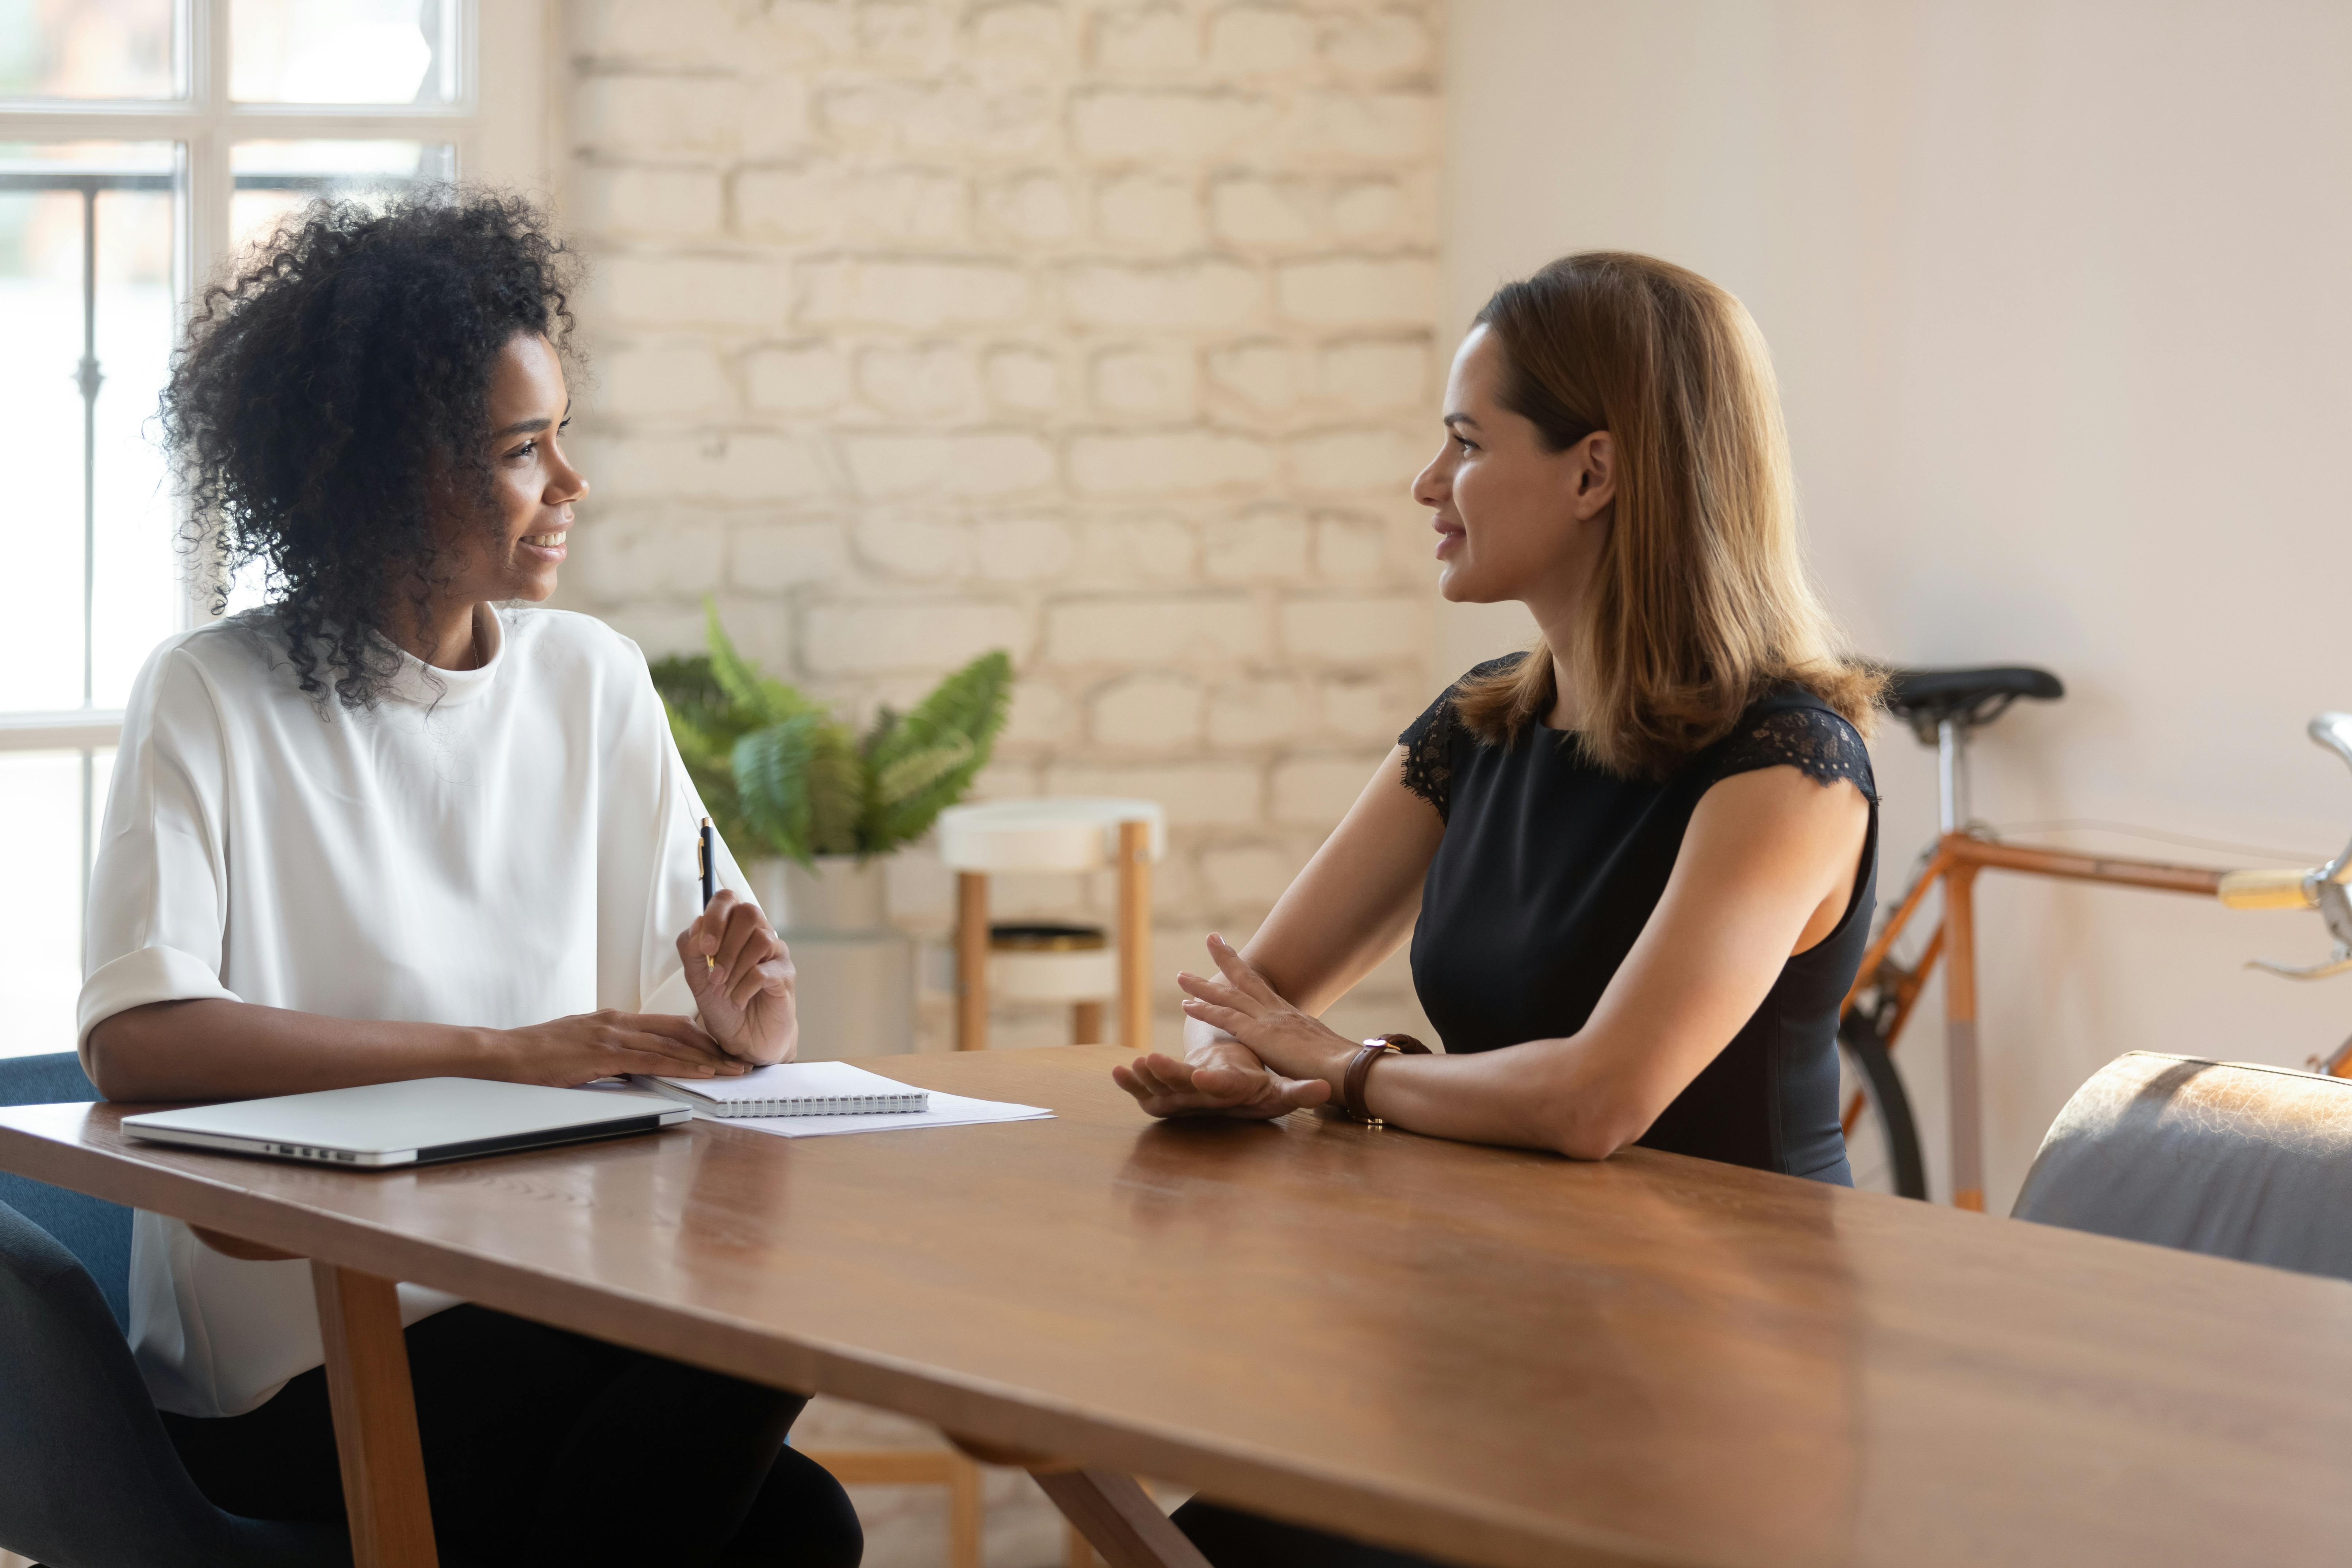 A woman interviewing another woman for a job in an informal setting